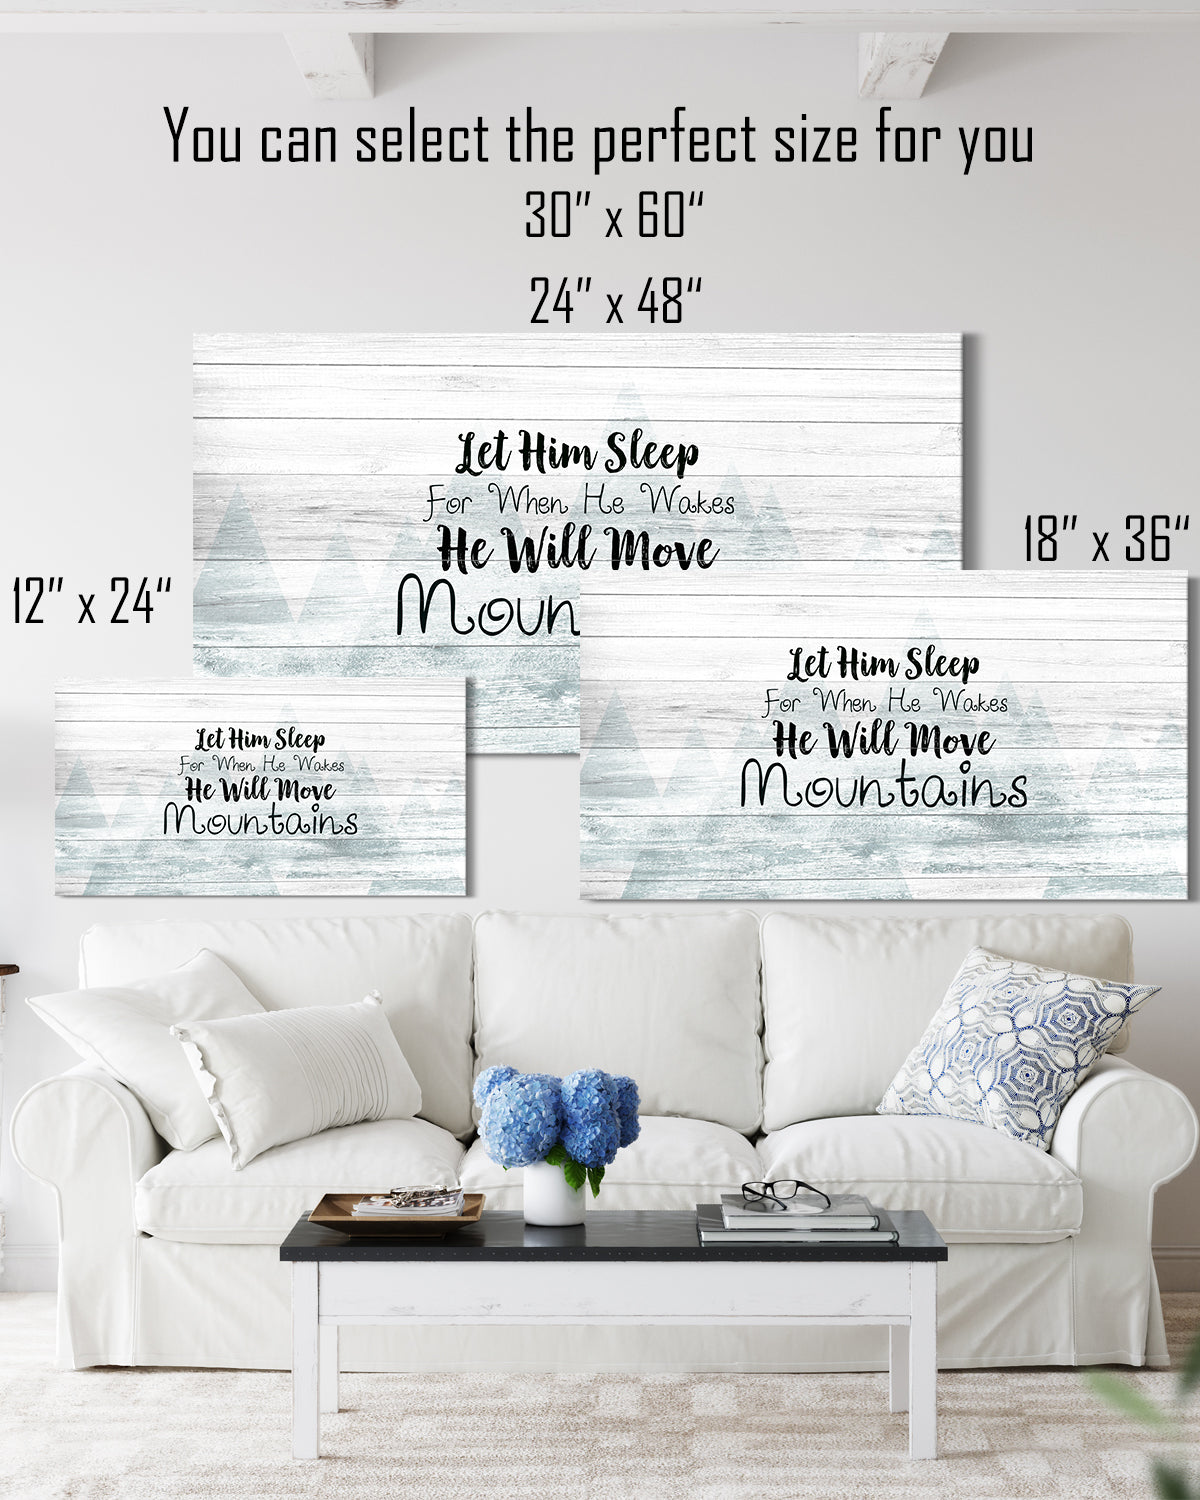 Let Him Sleep For When He Wakes He Will Move Mountains Wall Decor Art Canvas ready to hang